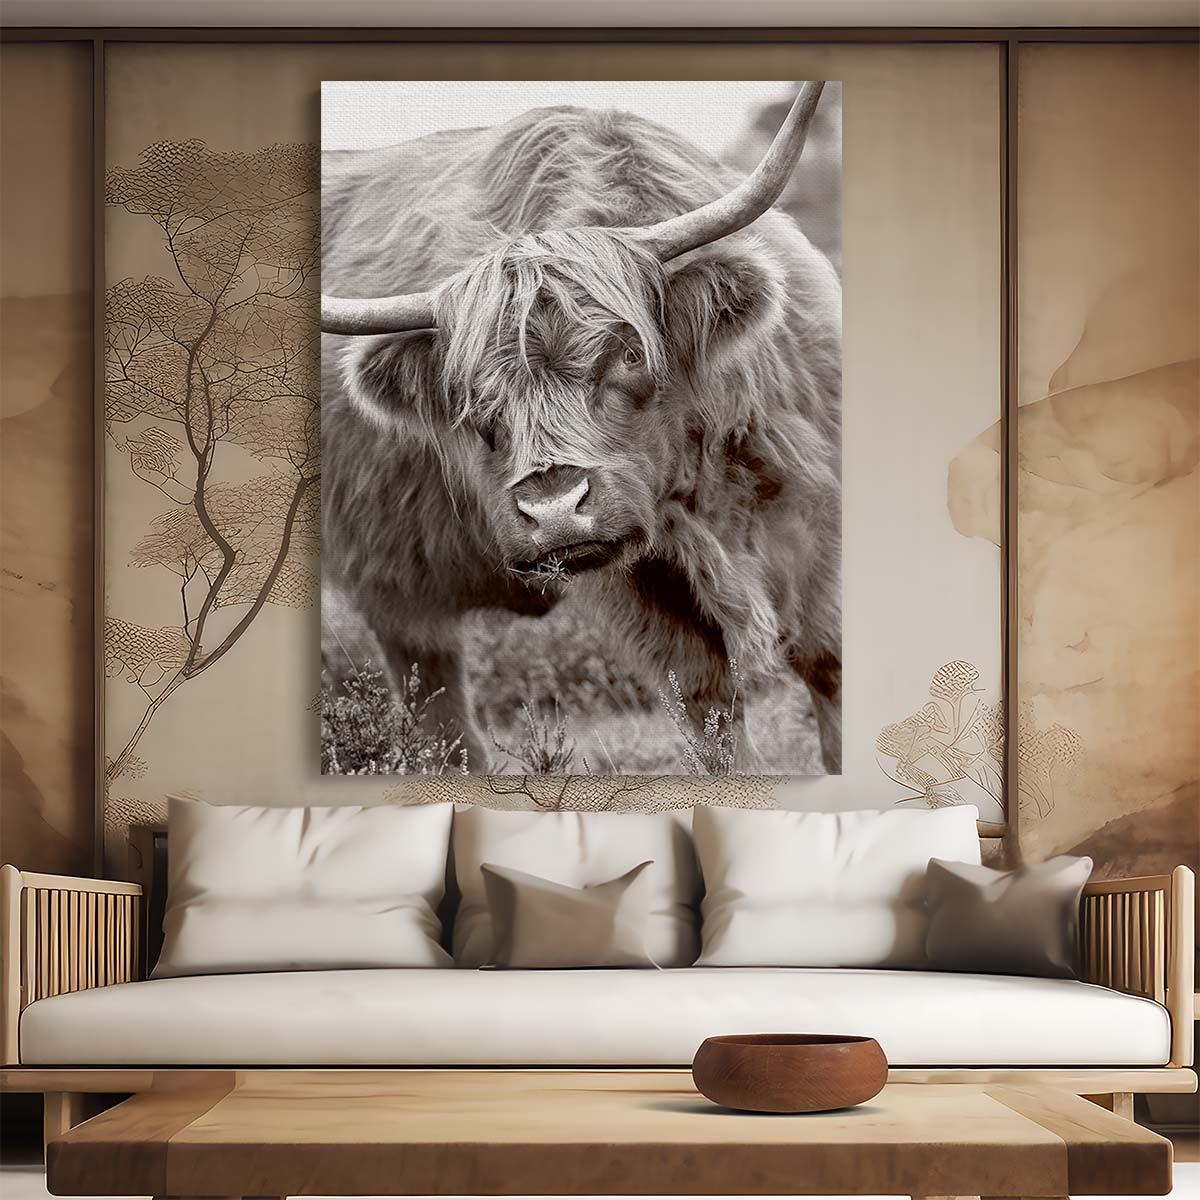 Highland Bull Close-Up Photography Wall Art by Jacky Parker by Luxuriance Designs, made in USA